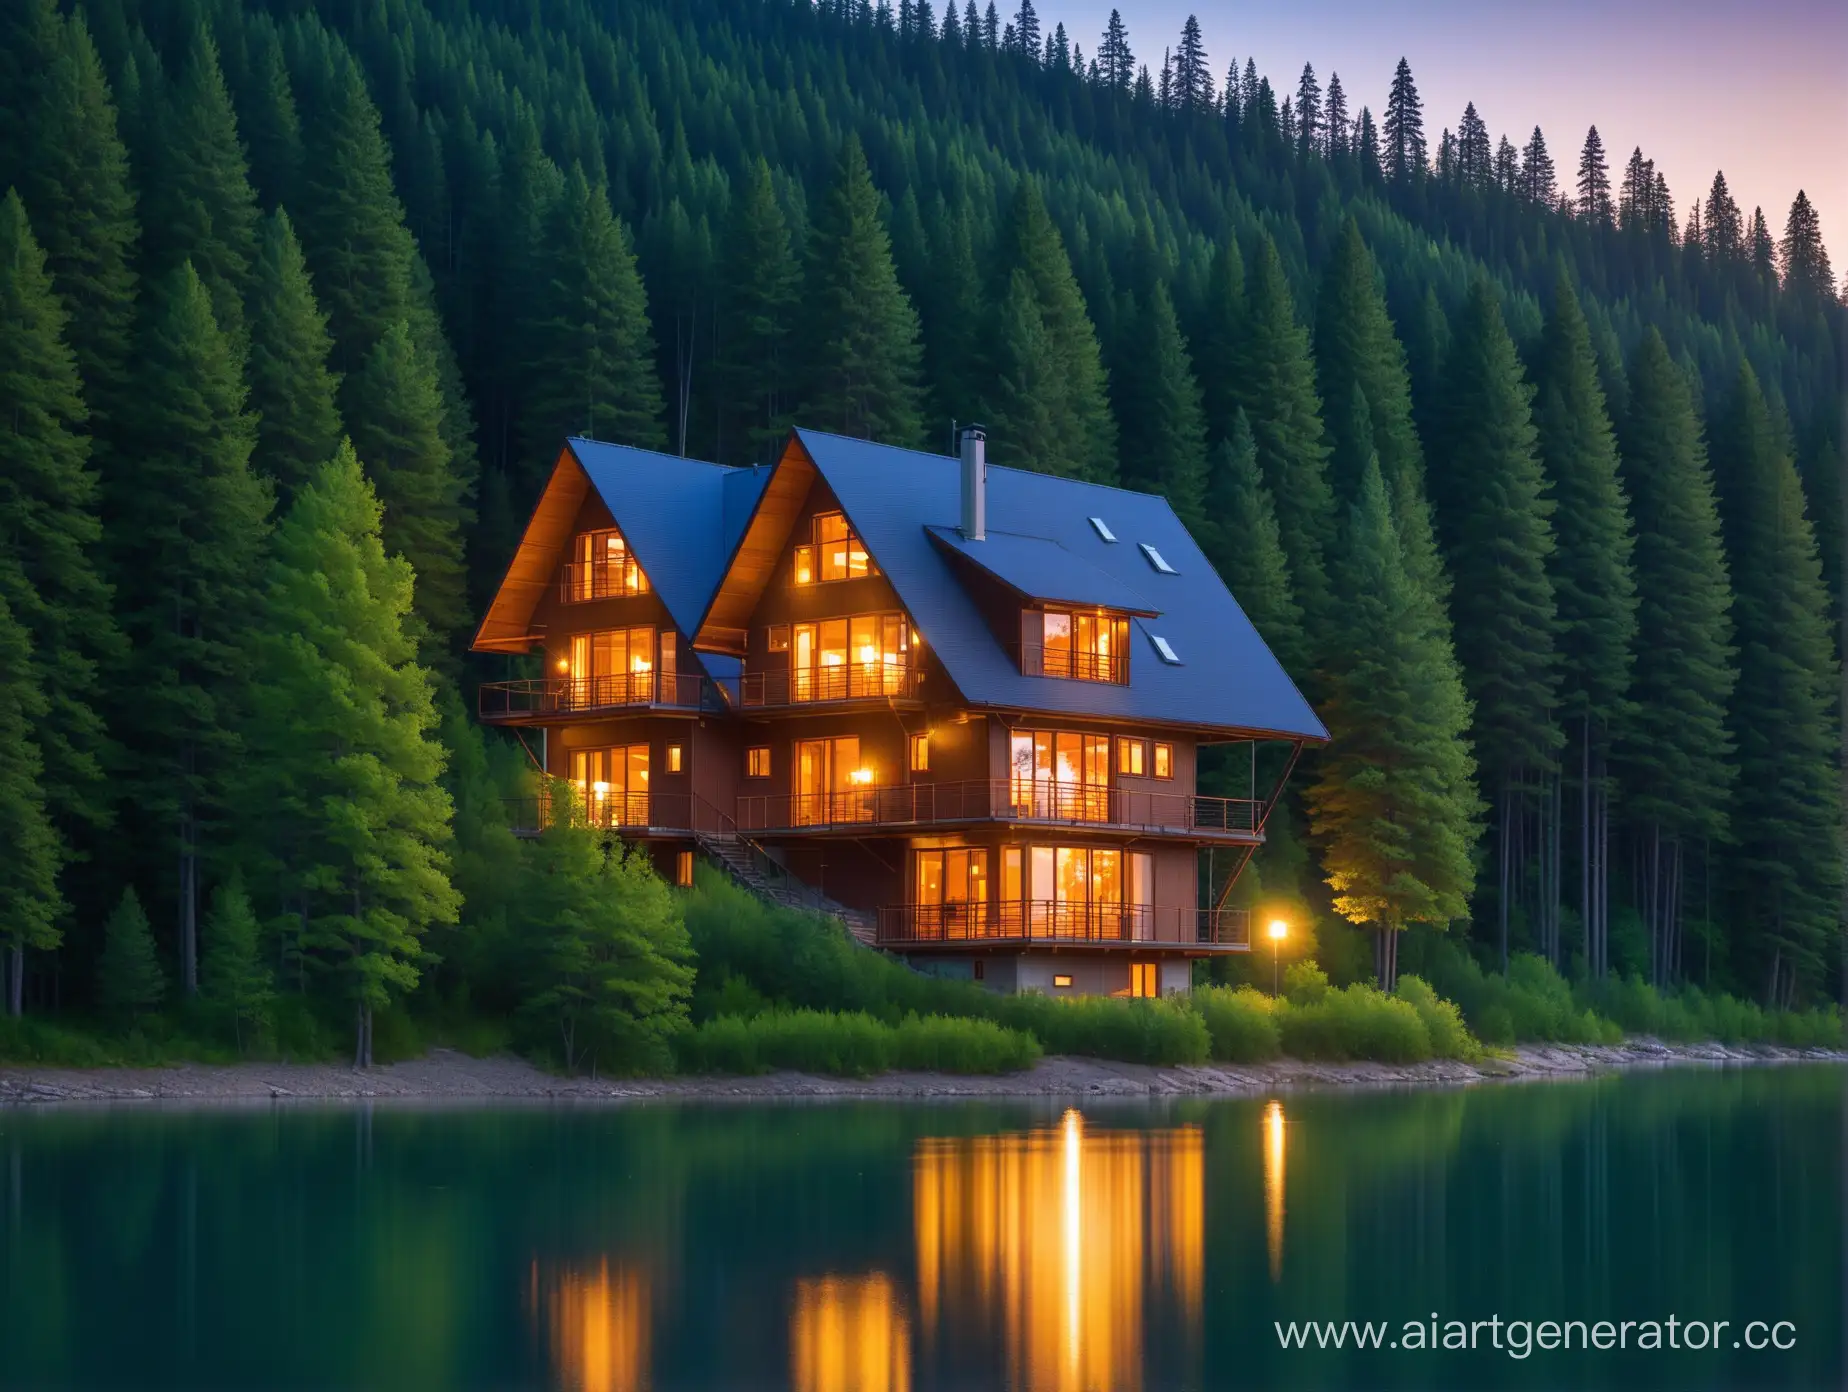 Rustic-TwoStory-House-by-a-Serene-Lake-in-a-Forested-Landscape